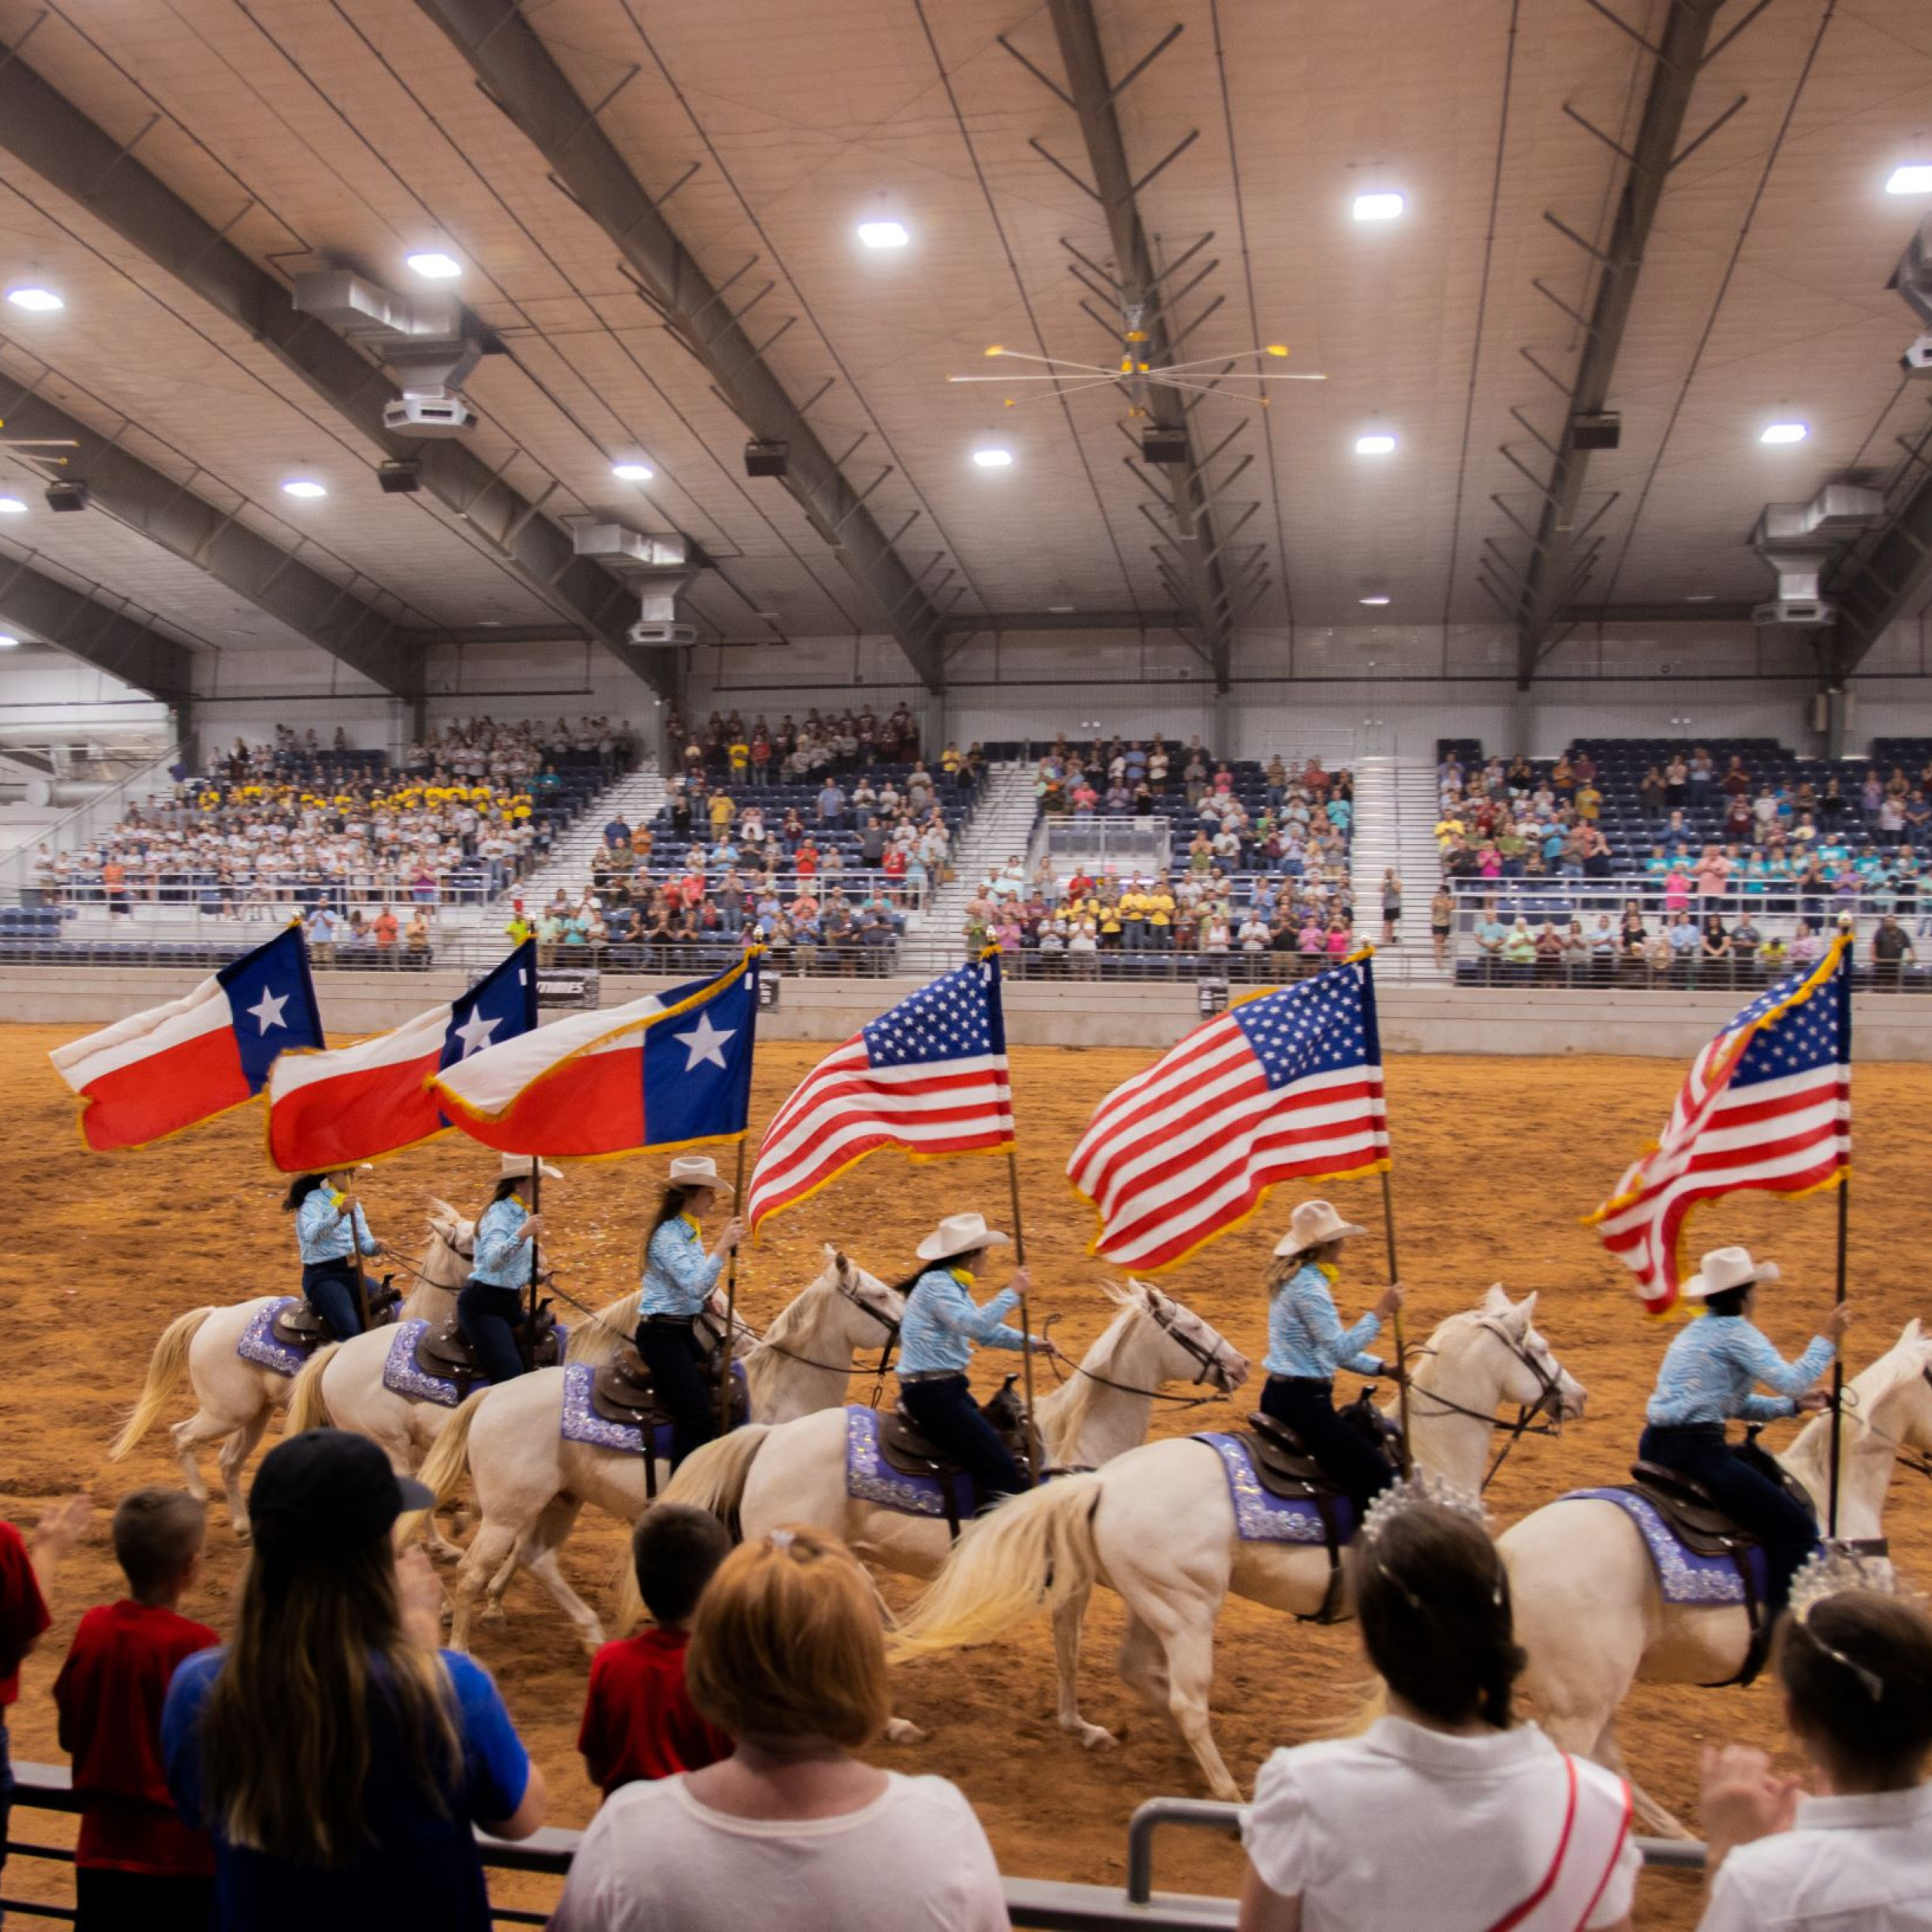 Taylor county expo center - riders on horses carrying US and Texas Flags